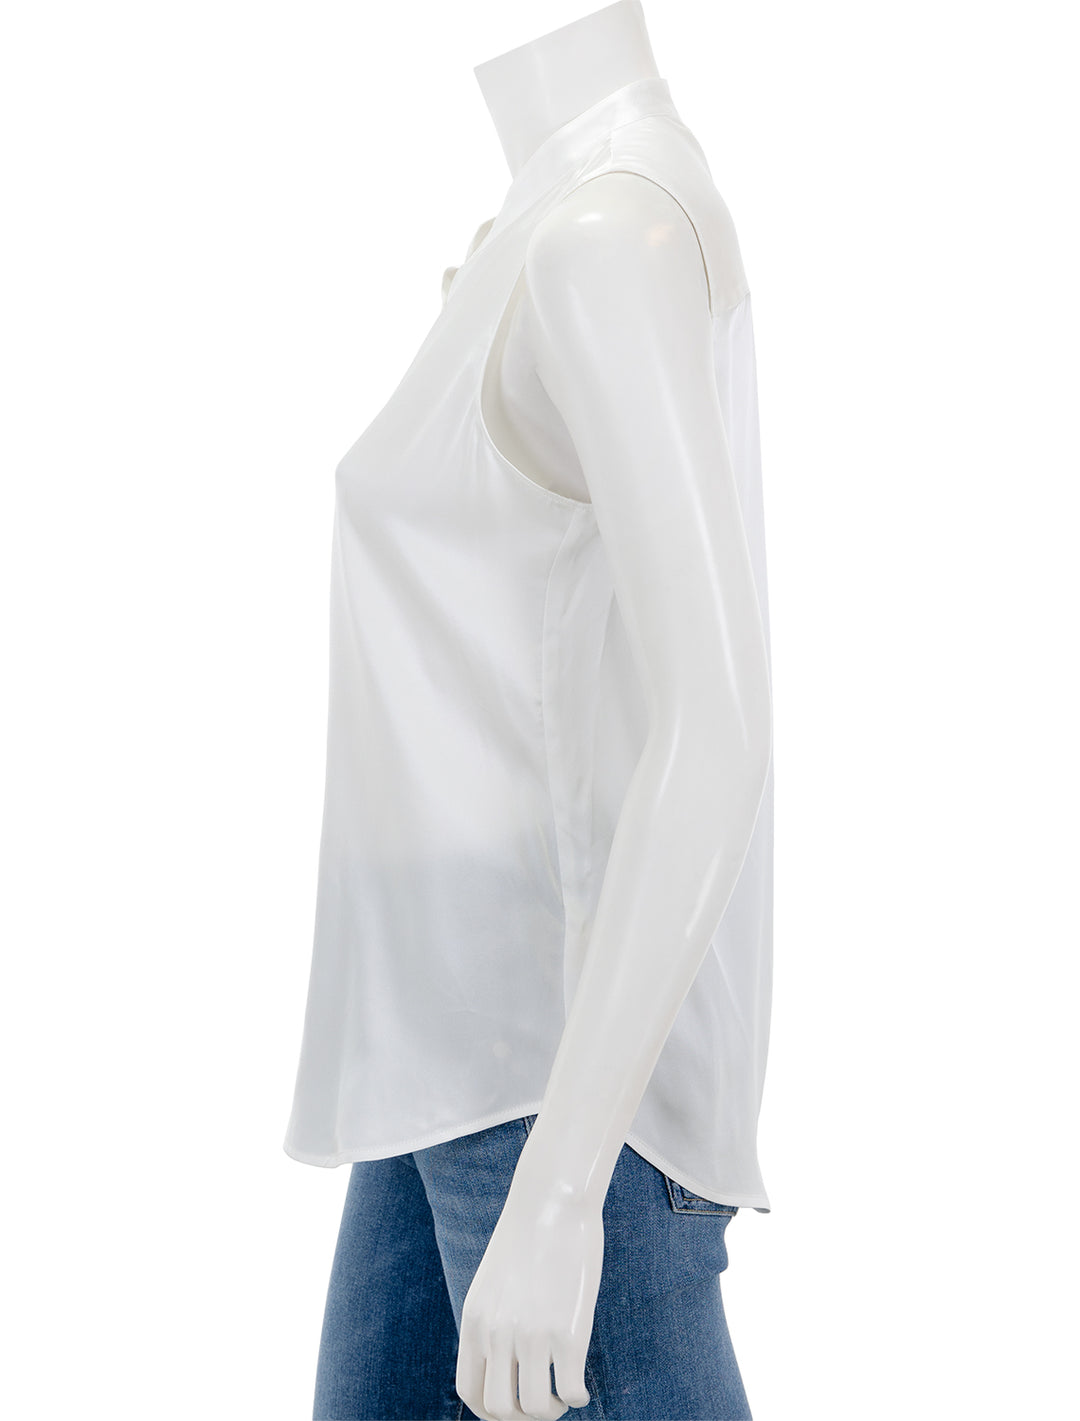 Side view of L'agence's hendrix band collar sleeveless blouse in white.